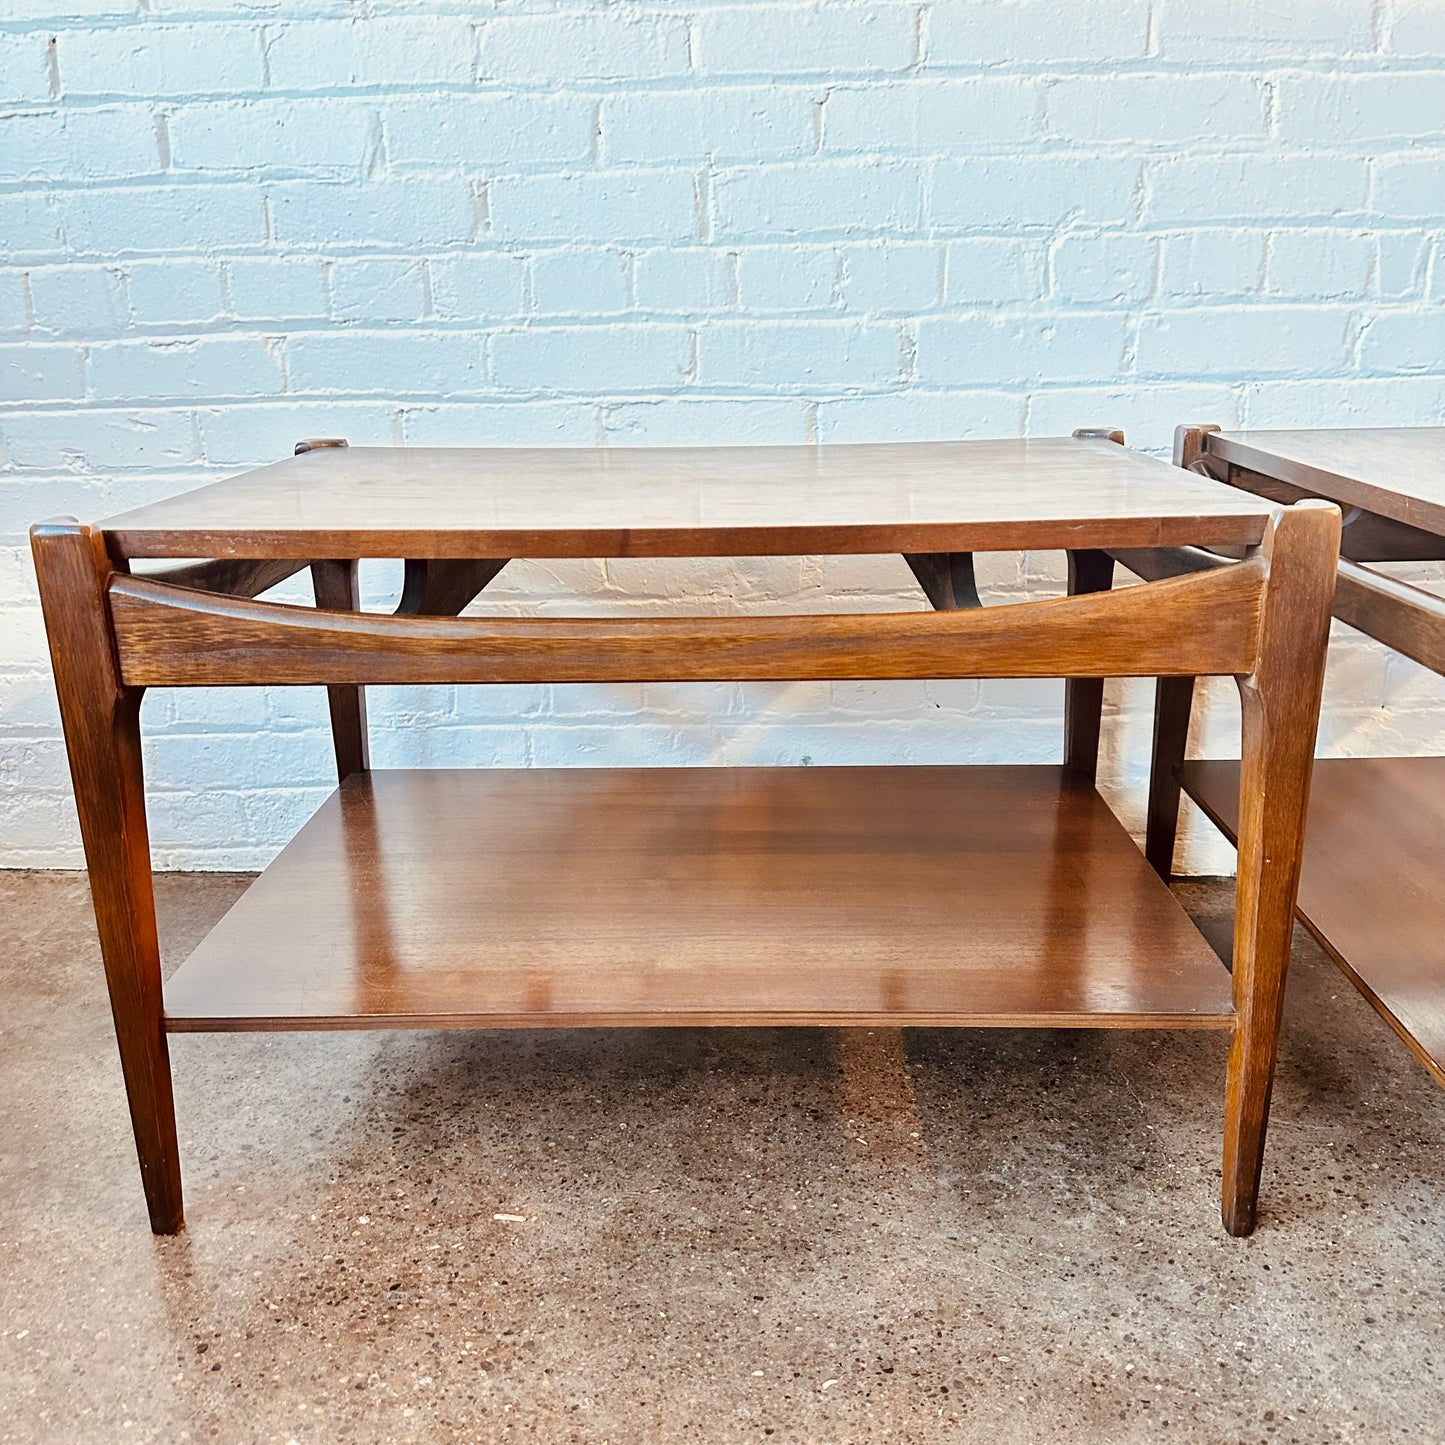 MID-CENTURY WALNUT TWO-TIER END TABLES - A PAIR